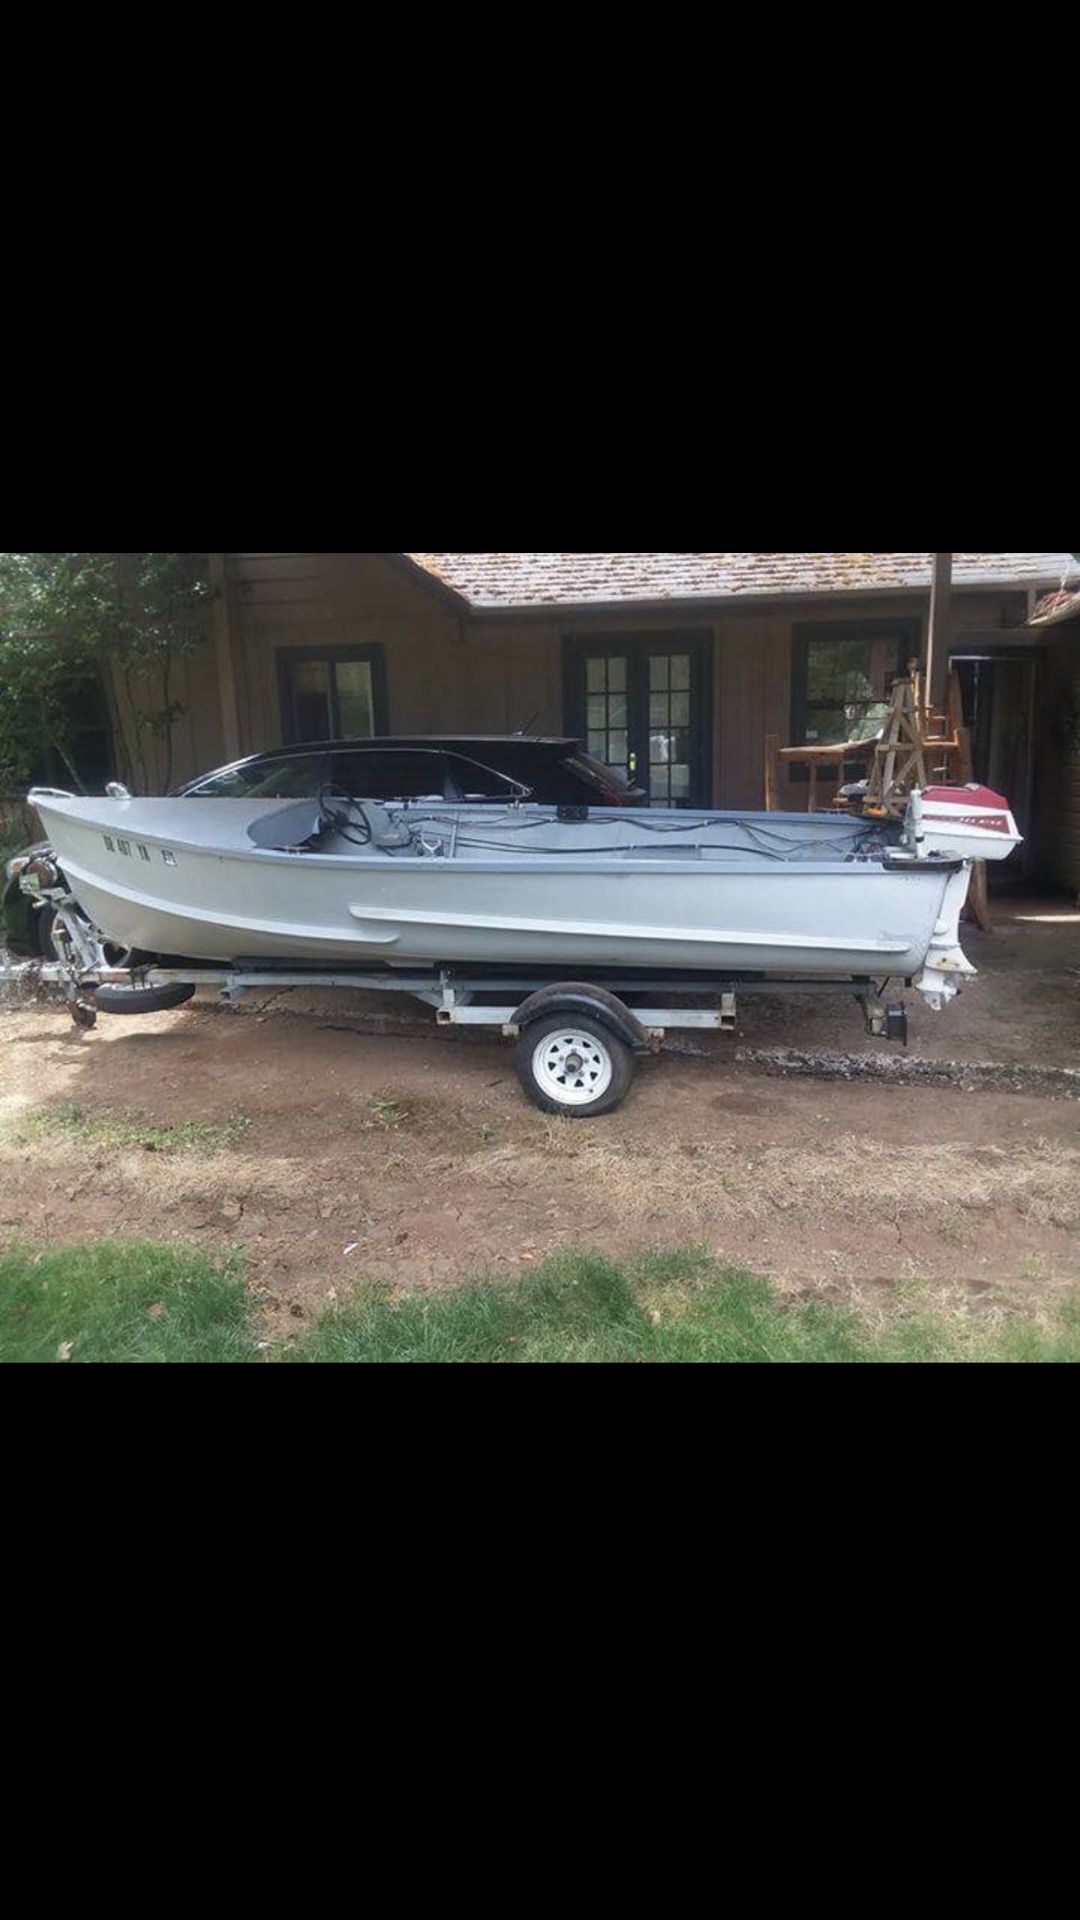 16ft Larson Boat for Sale in Cottage Grove, OR - OfferUp